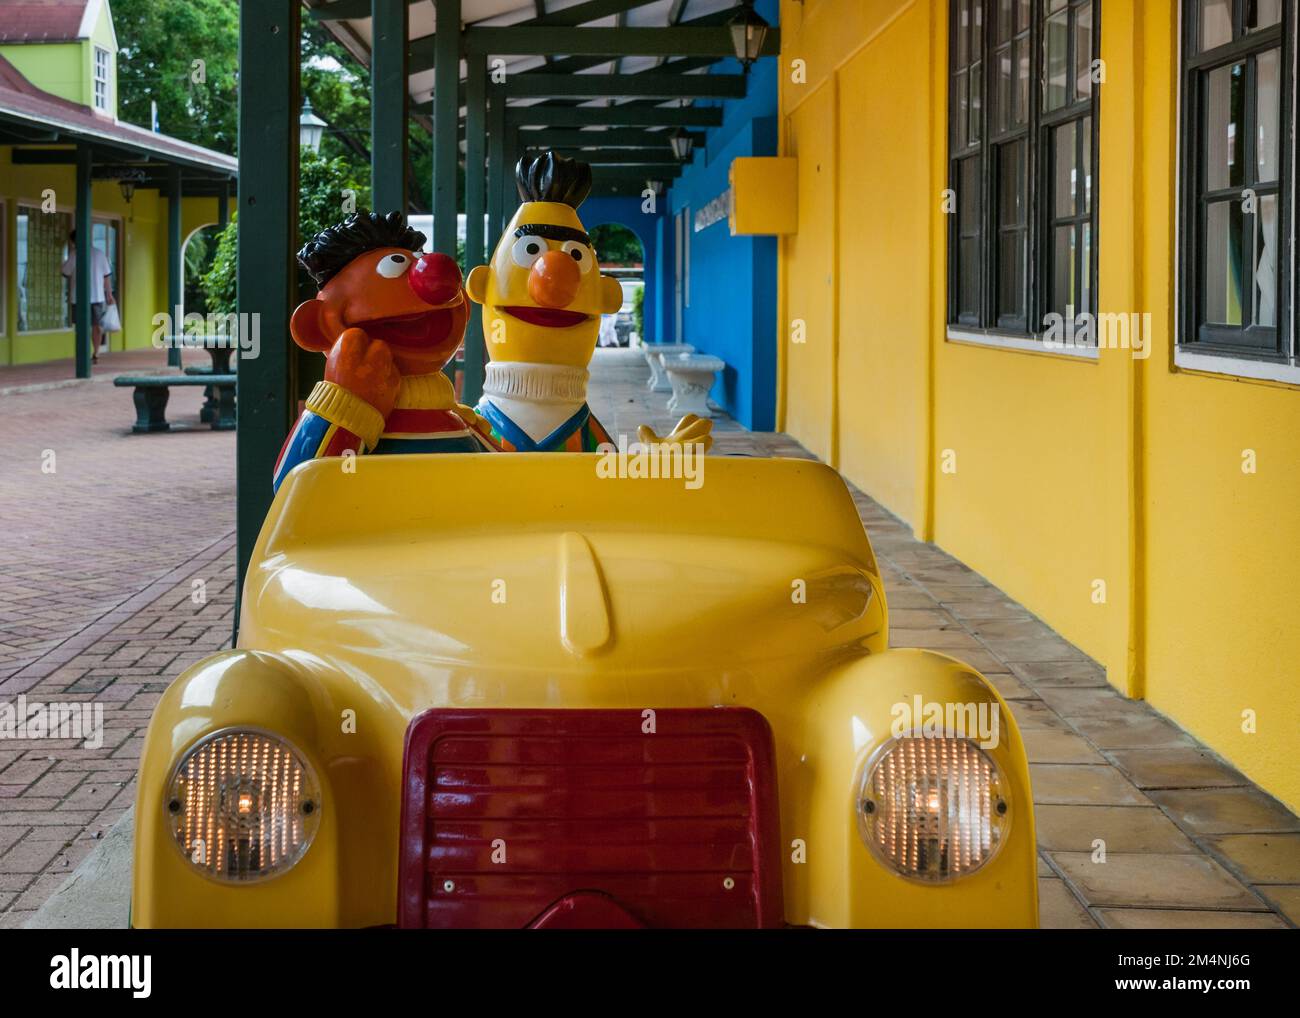 WILLEMSTAD, CURACAO - NOVEMBER 21, 2008: A yellow car for the entertainment of young children and with Sesame Street's muppets Bert and Ernie stands o Stock Photo